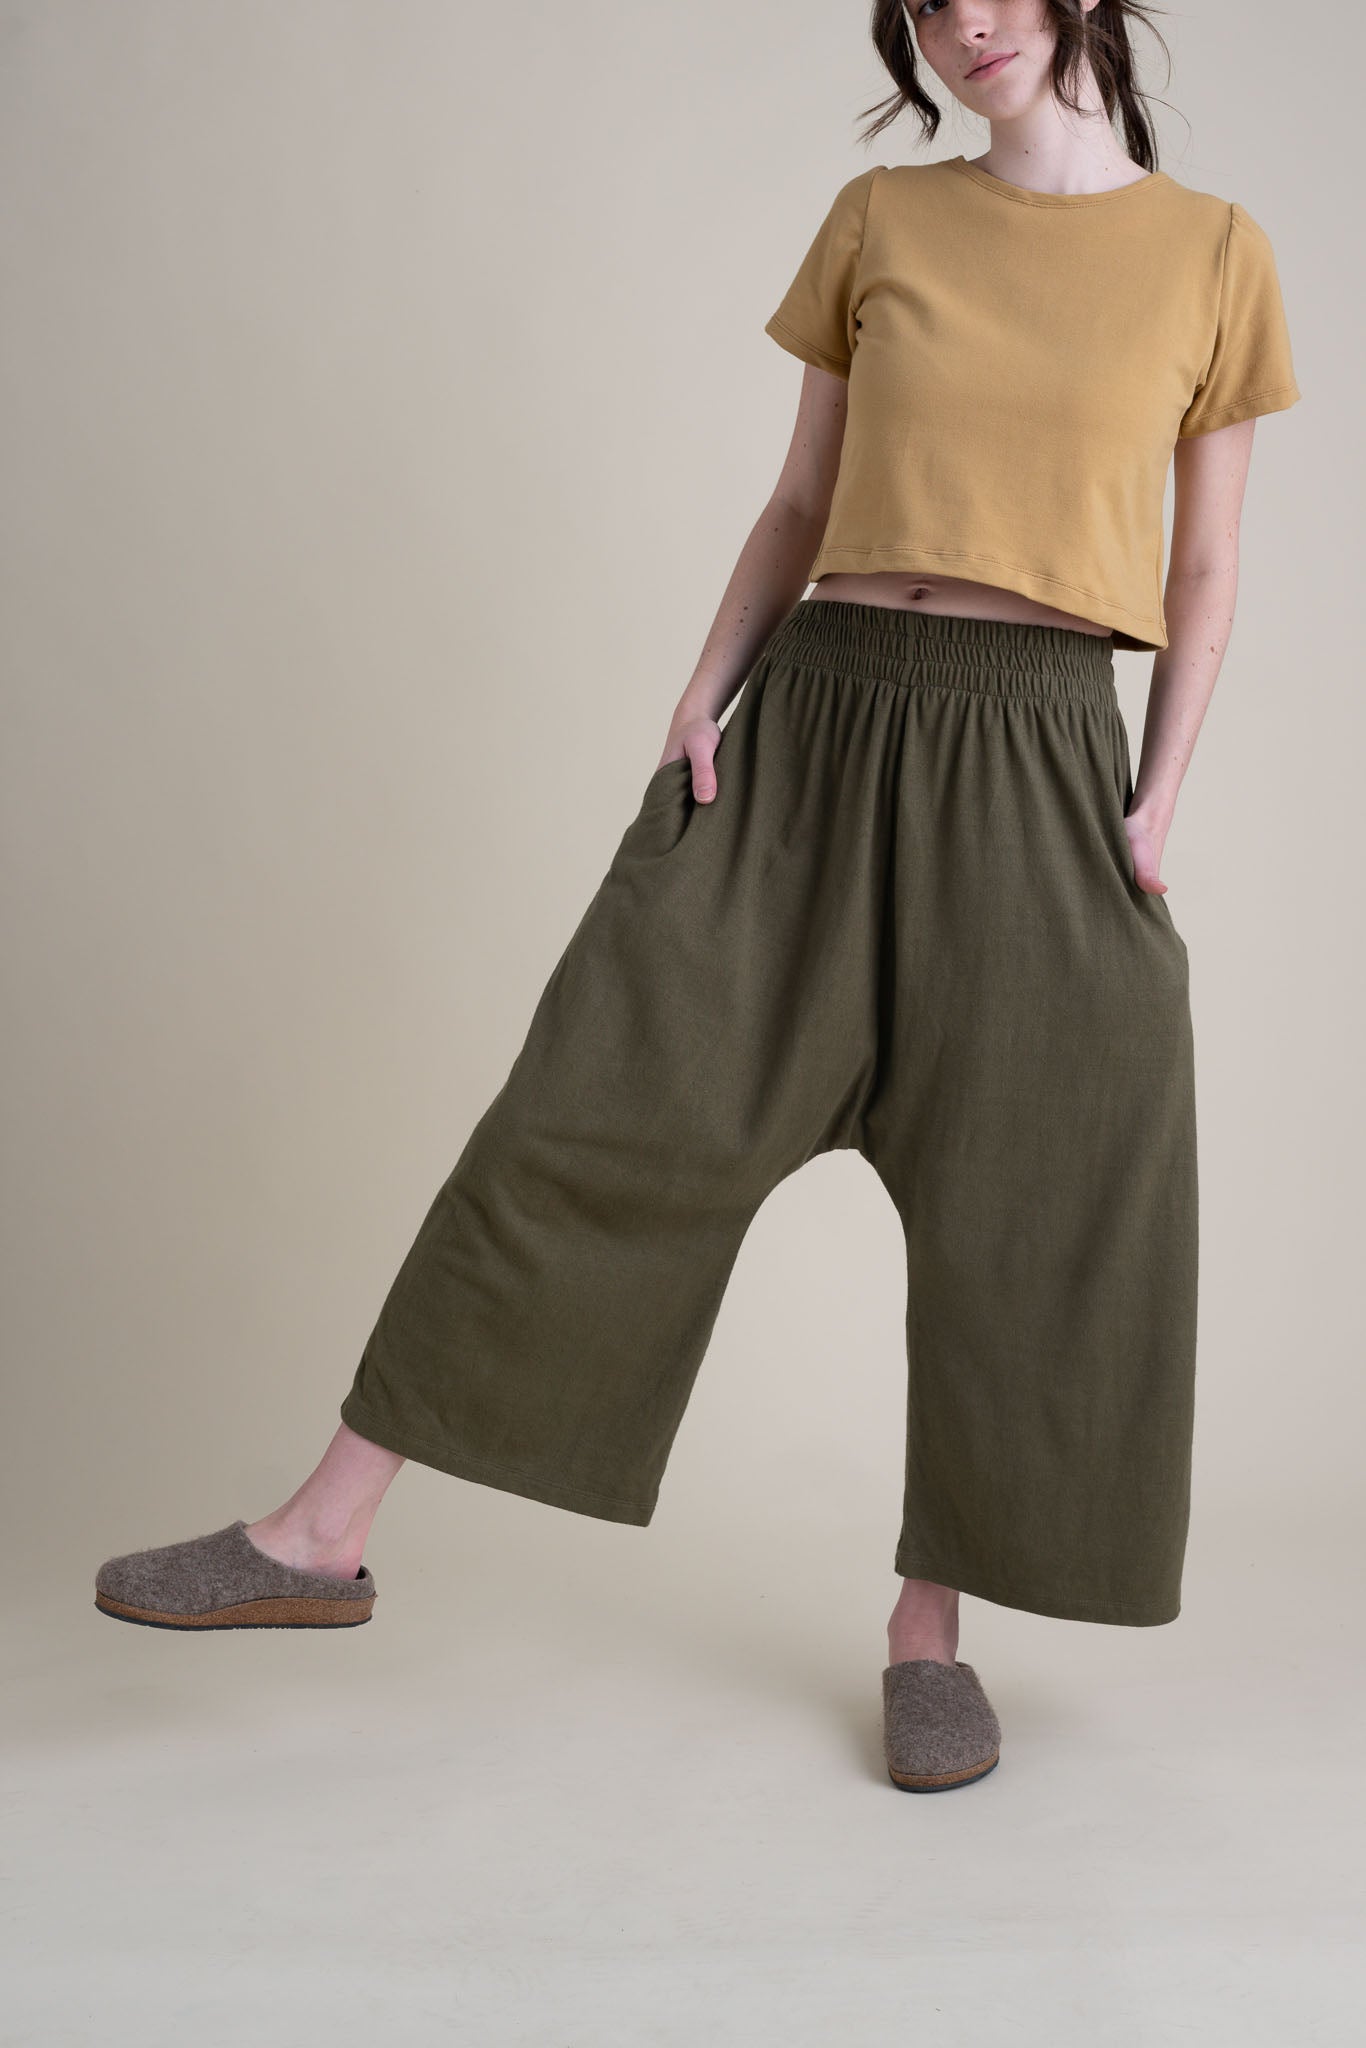 Weekend Pants in Moss – Conscious Clothing